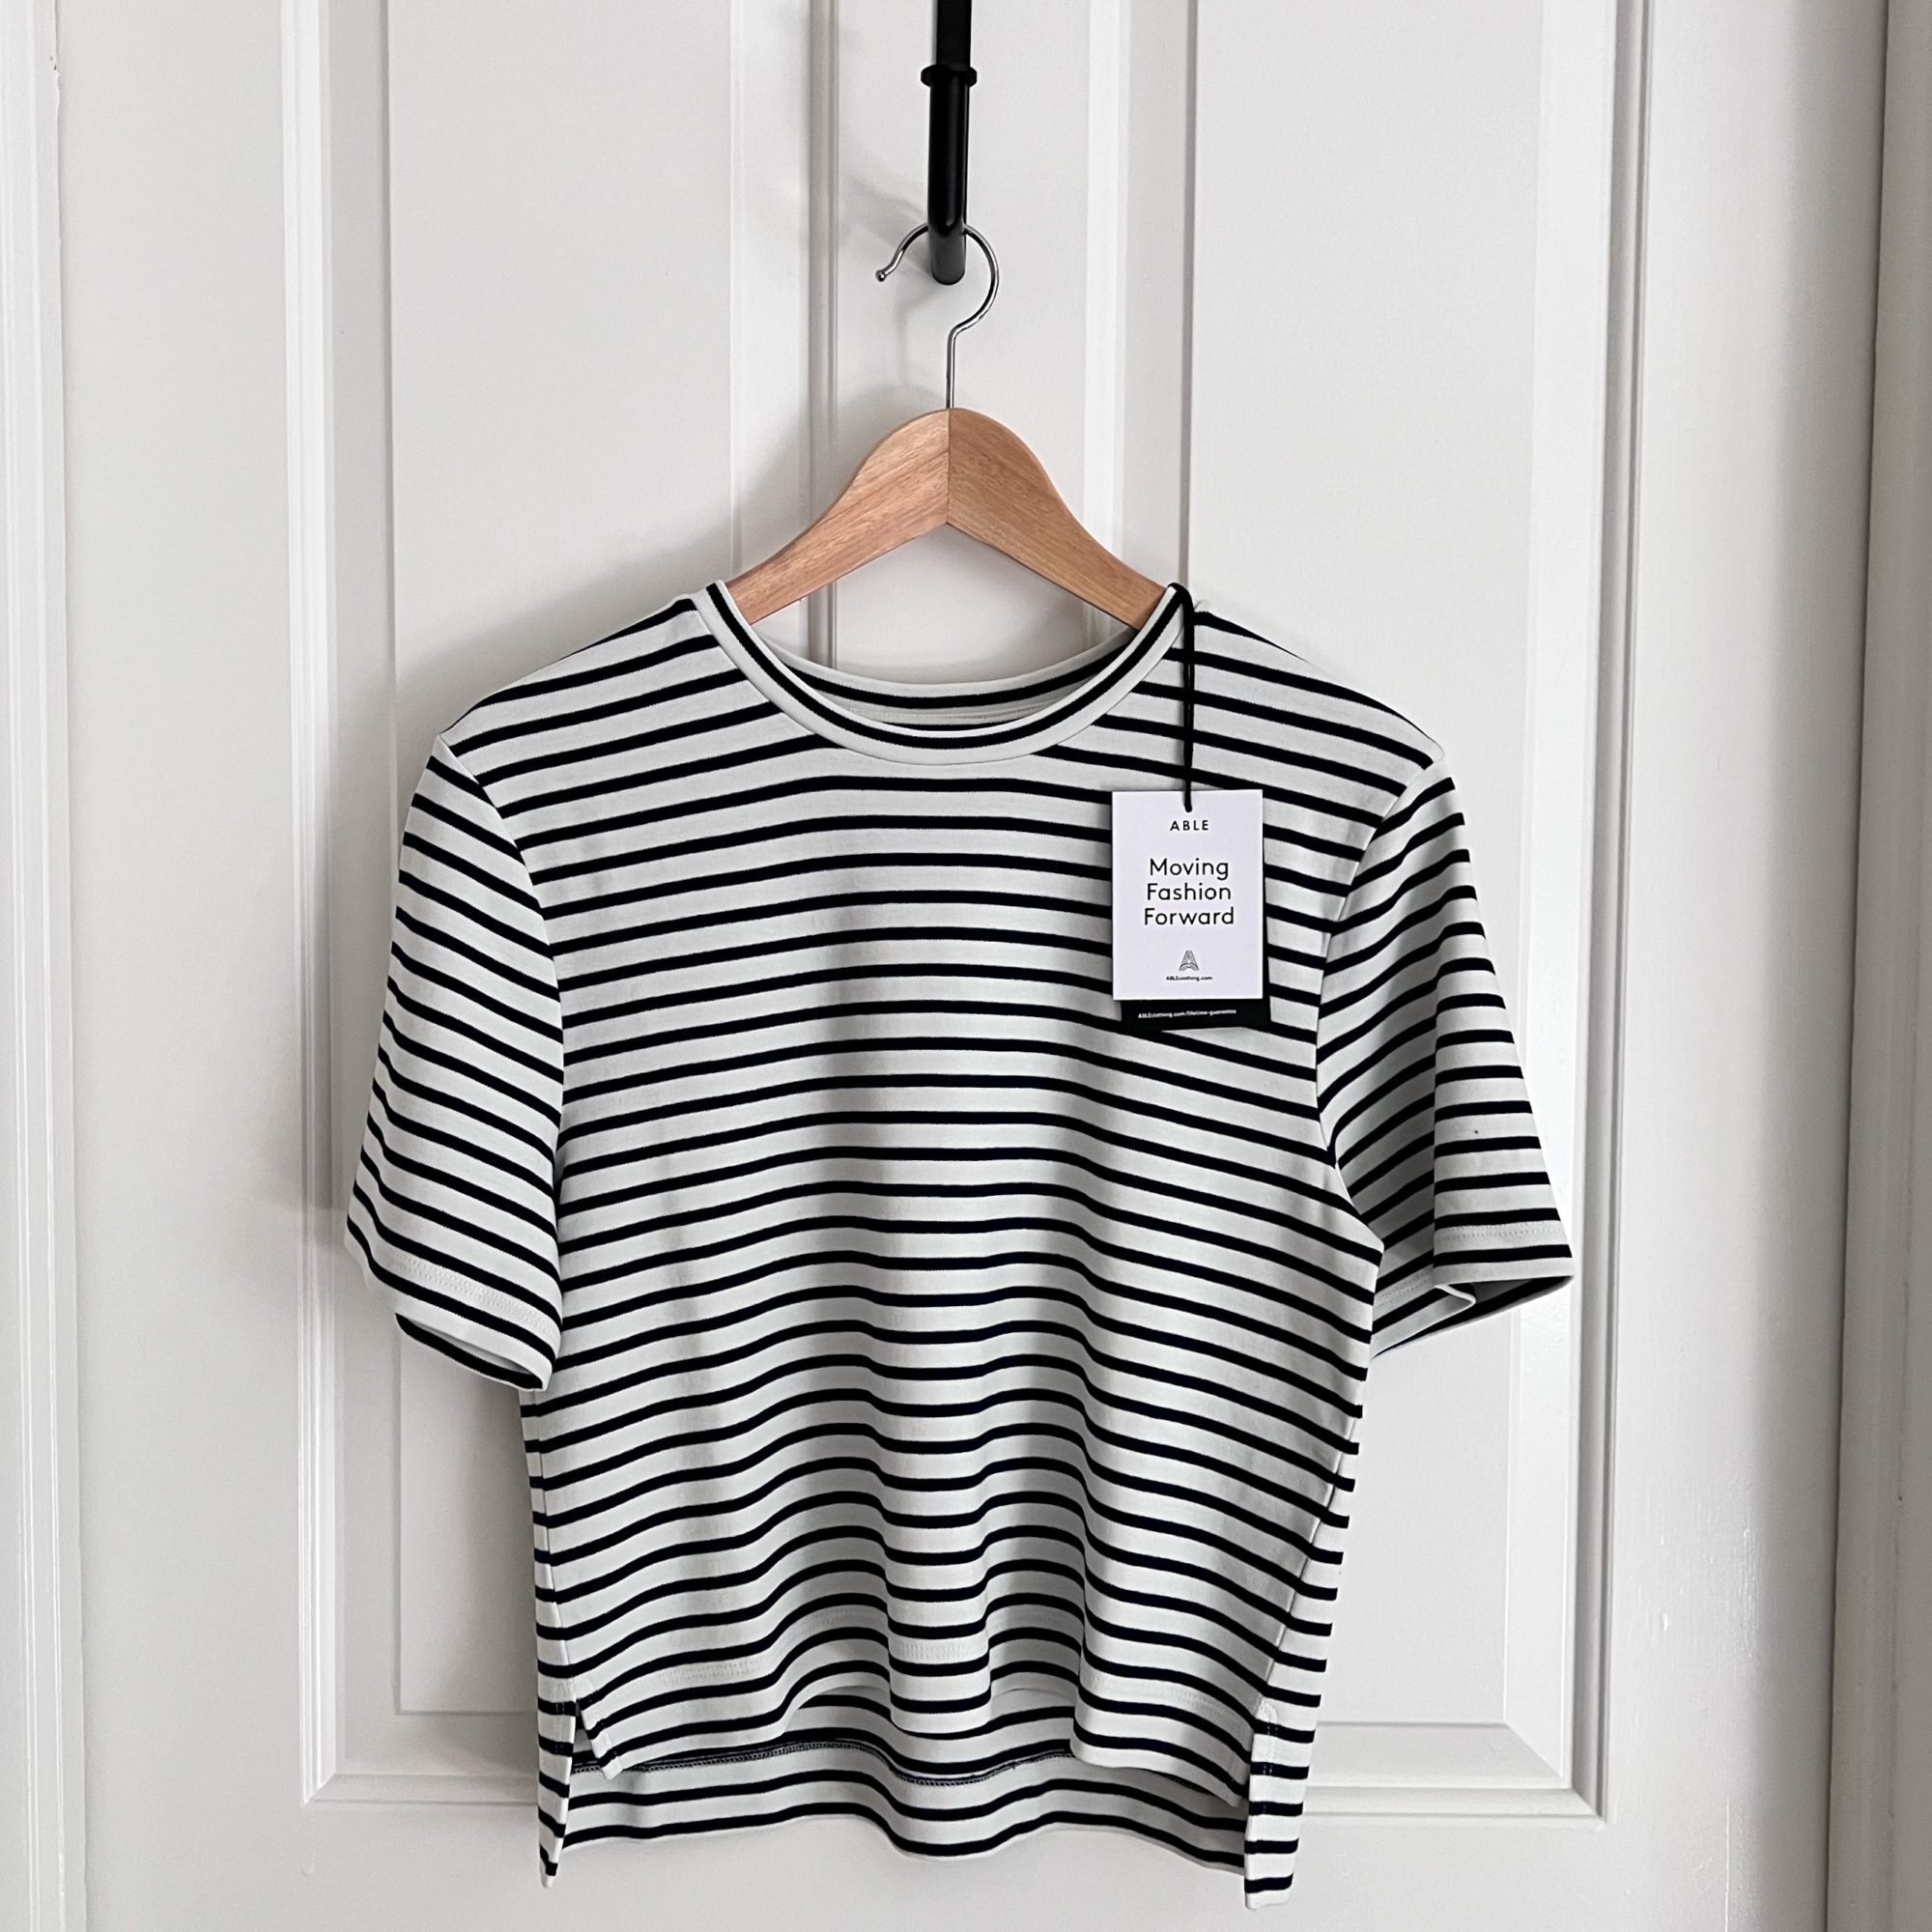 A striped tee hangs from a wooden hanger